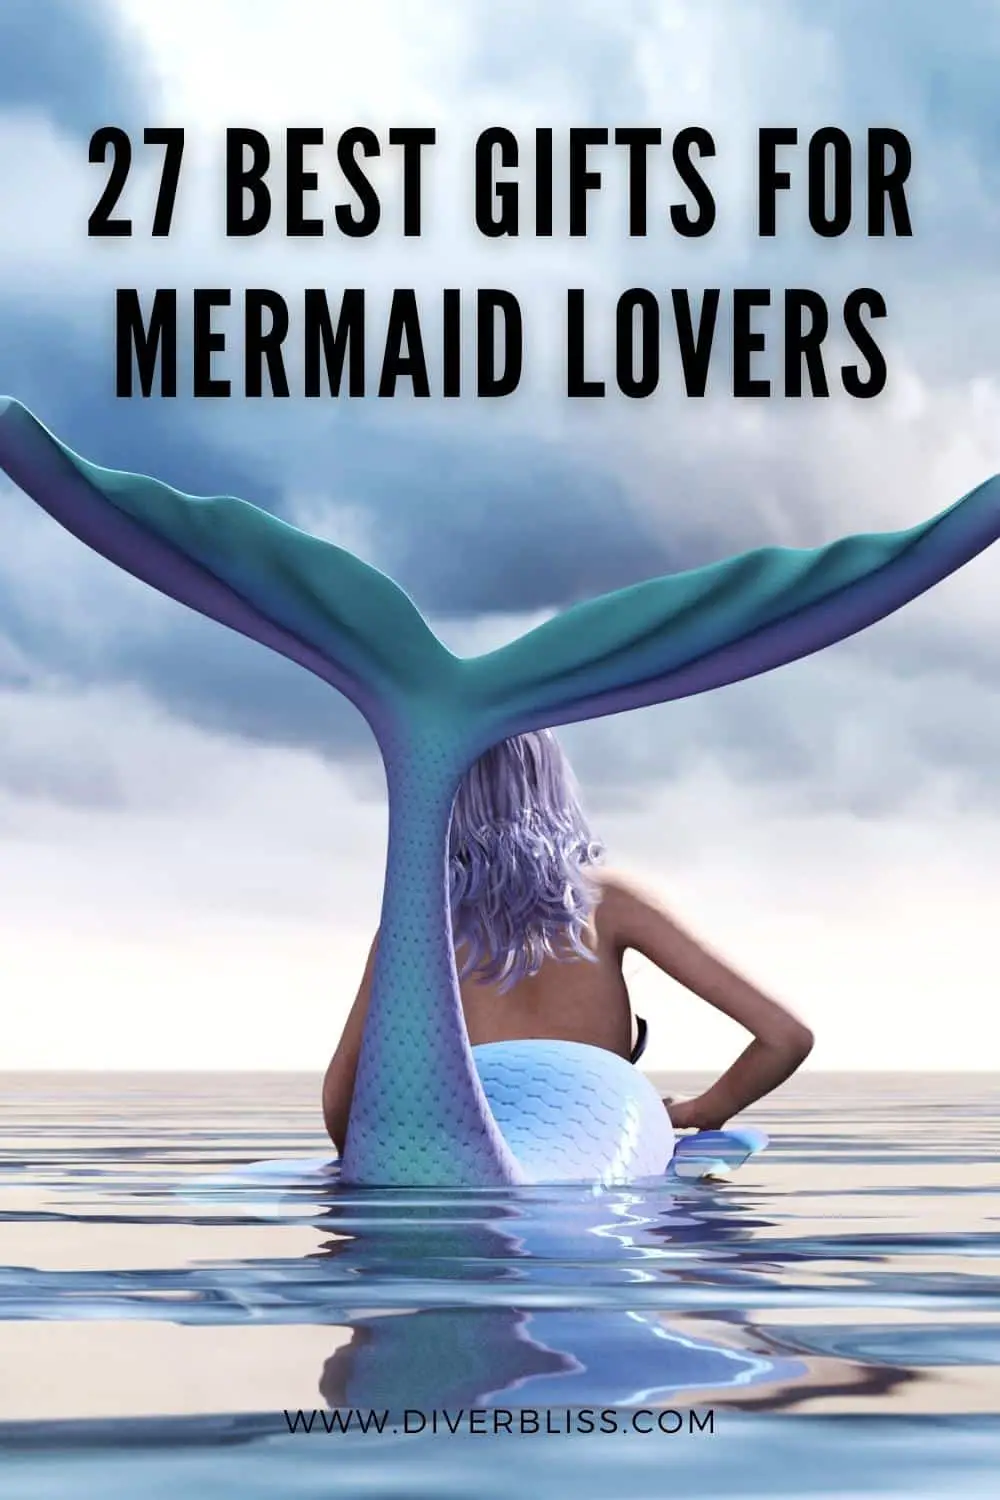 27 best gifts for mermaid lovers